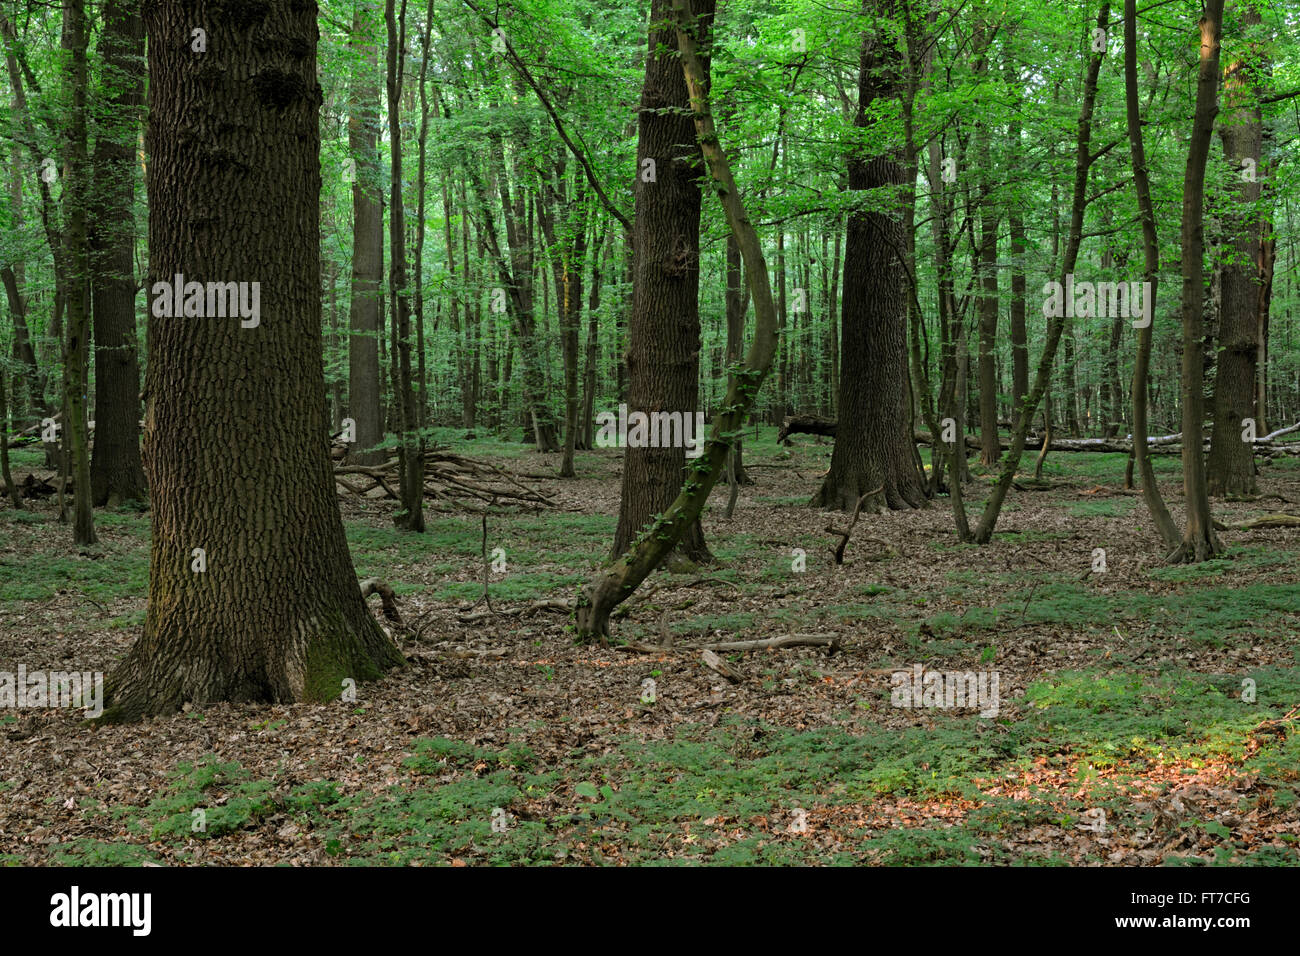 Natural forest / Natural wood reserve / Naturwaldzelle / Urspruenglicher Laubwald, protected area in spring. Stock Photo